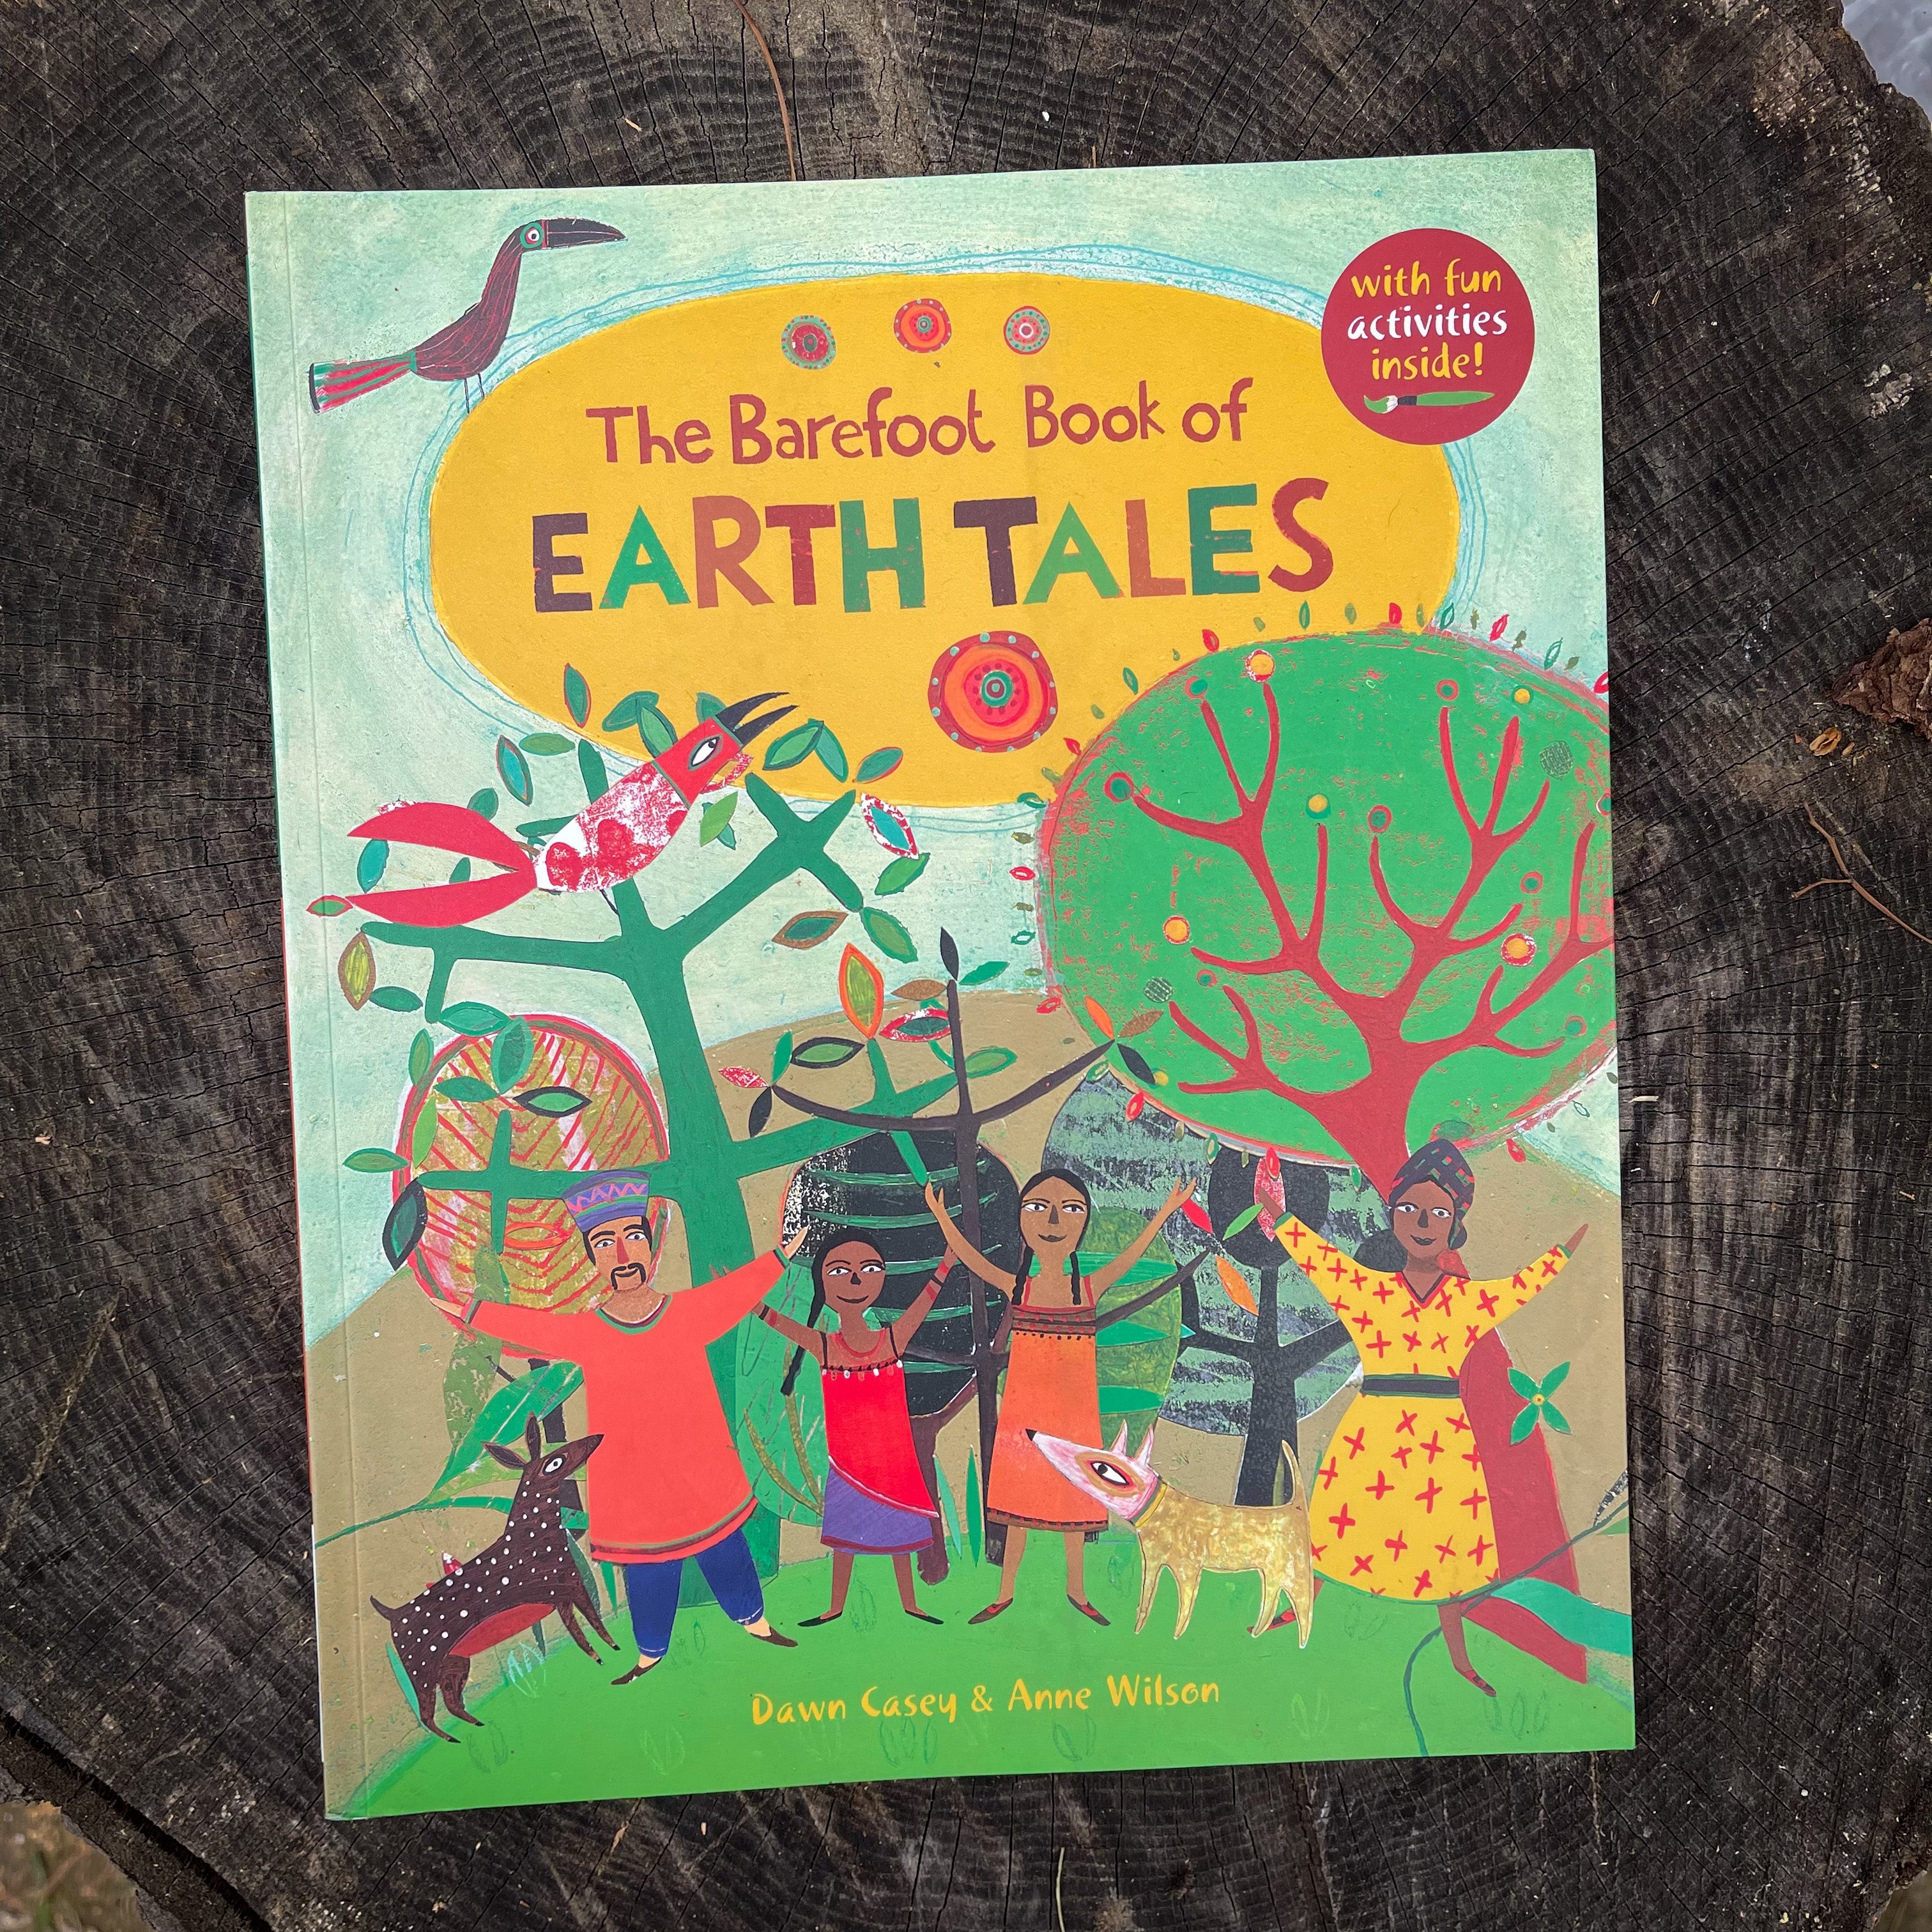 "The Barefoot Book of Earth Tales"